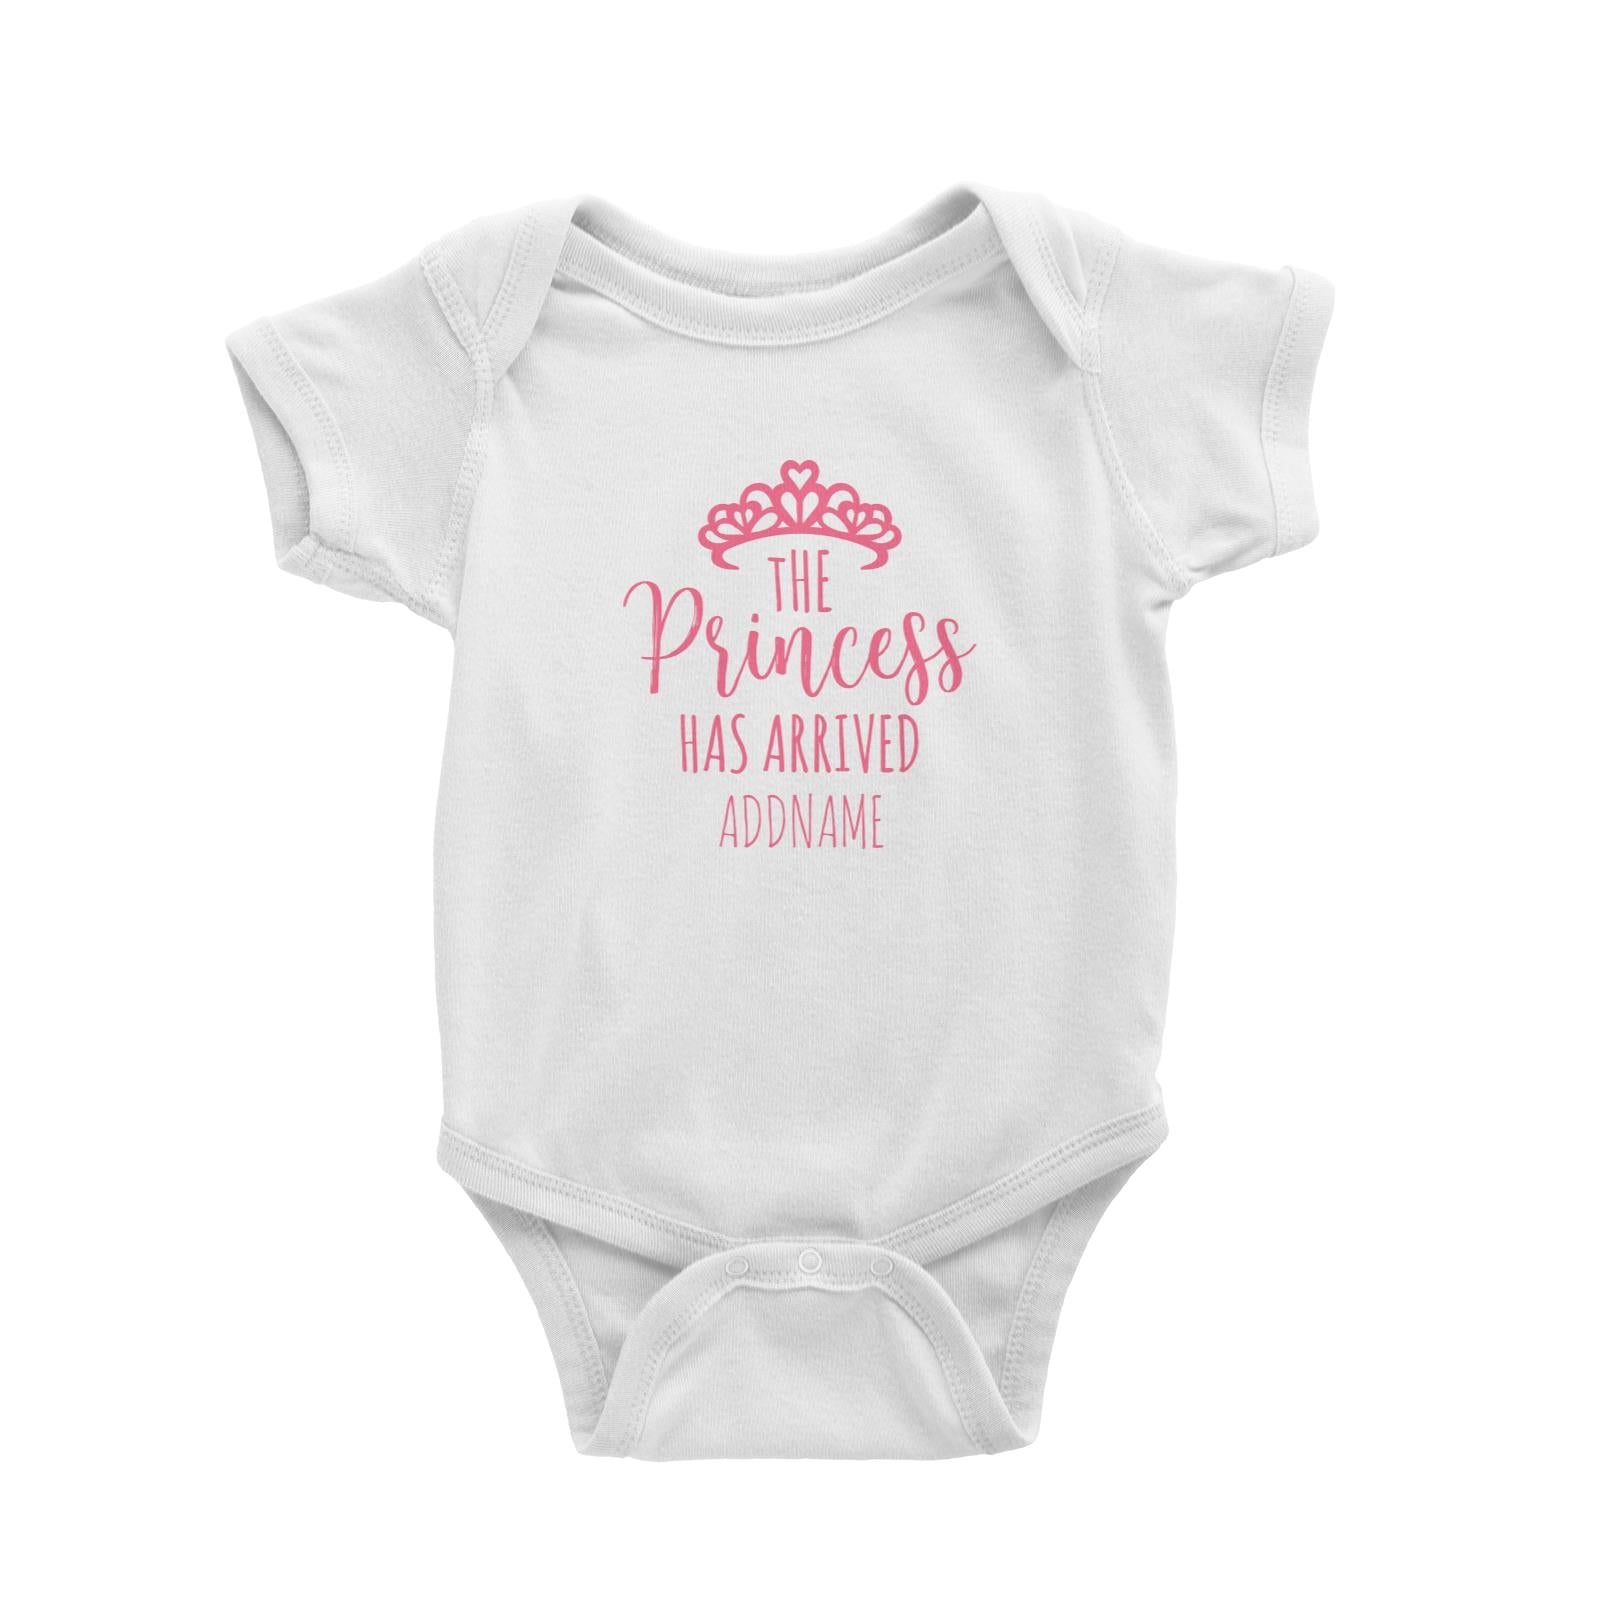 The Princess Has Arrived with Tiara Addname Baby Romper